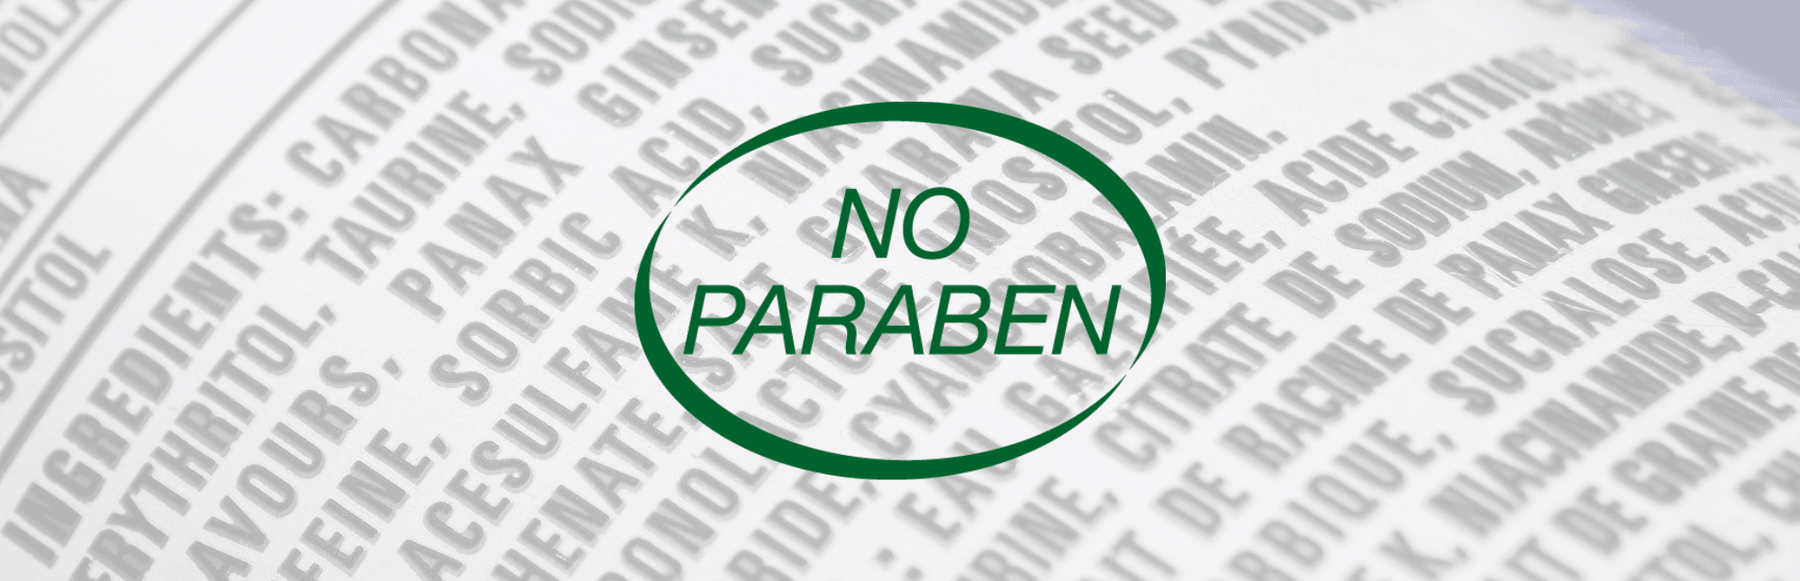 Why Parabens Are Bad